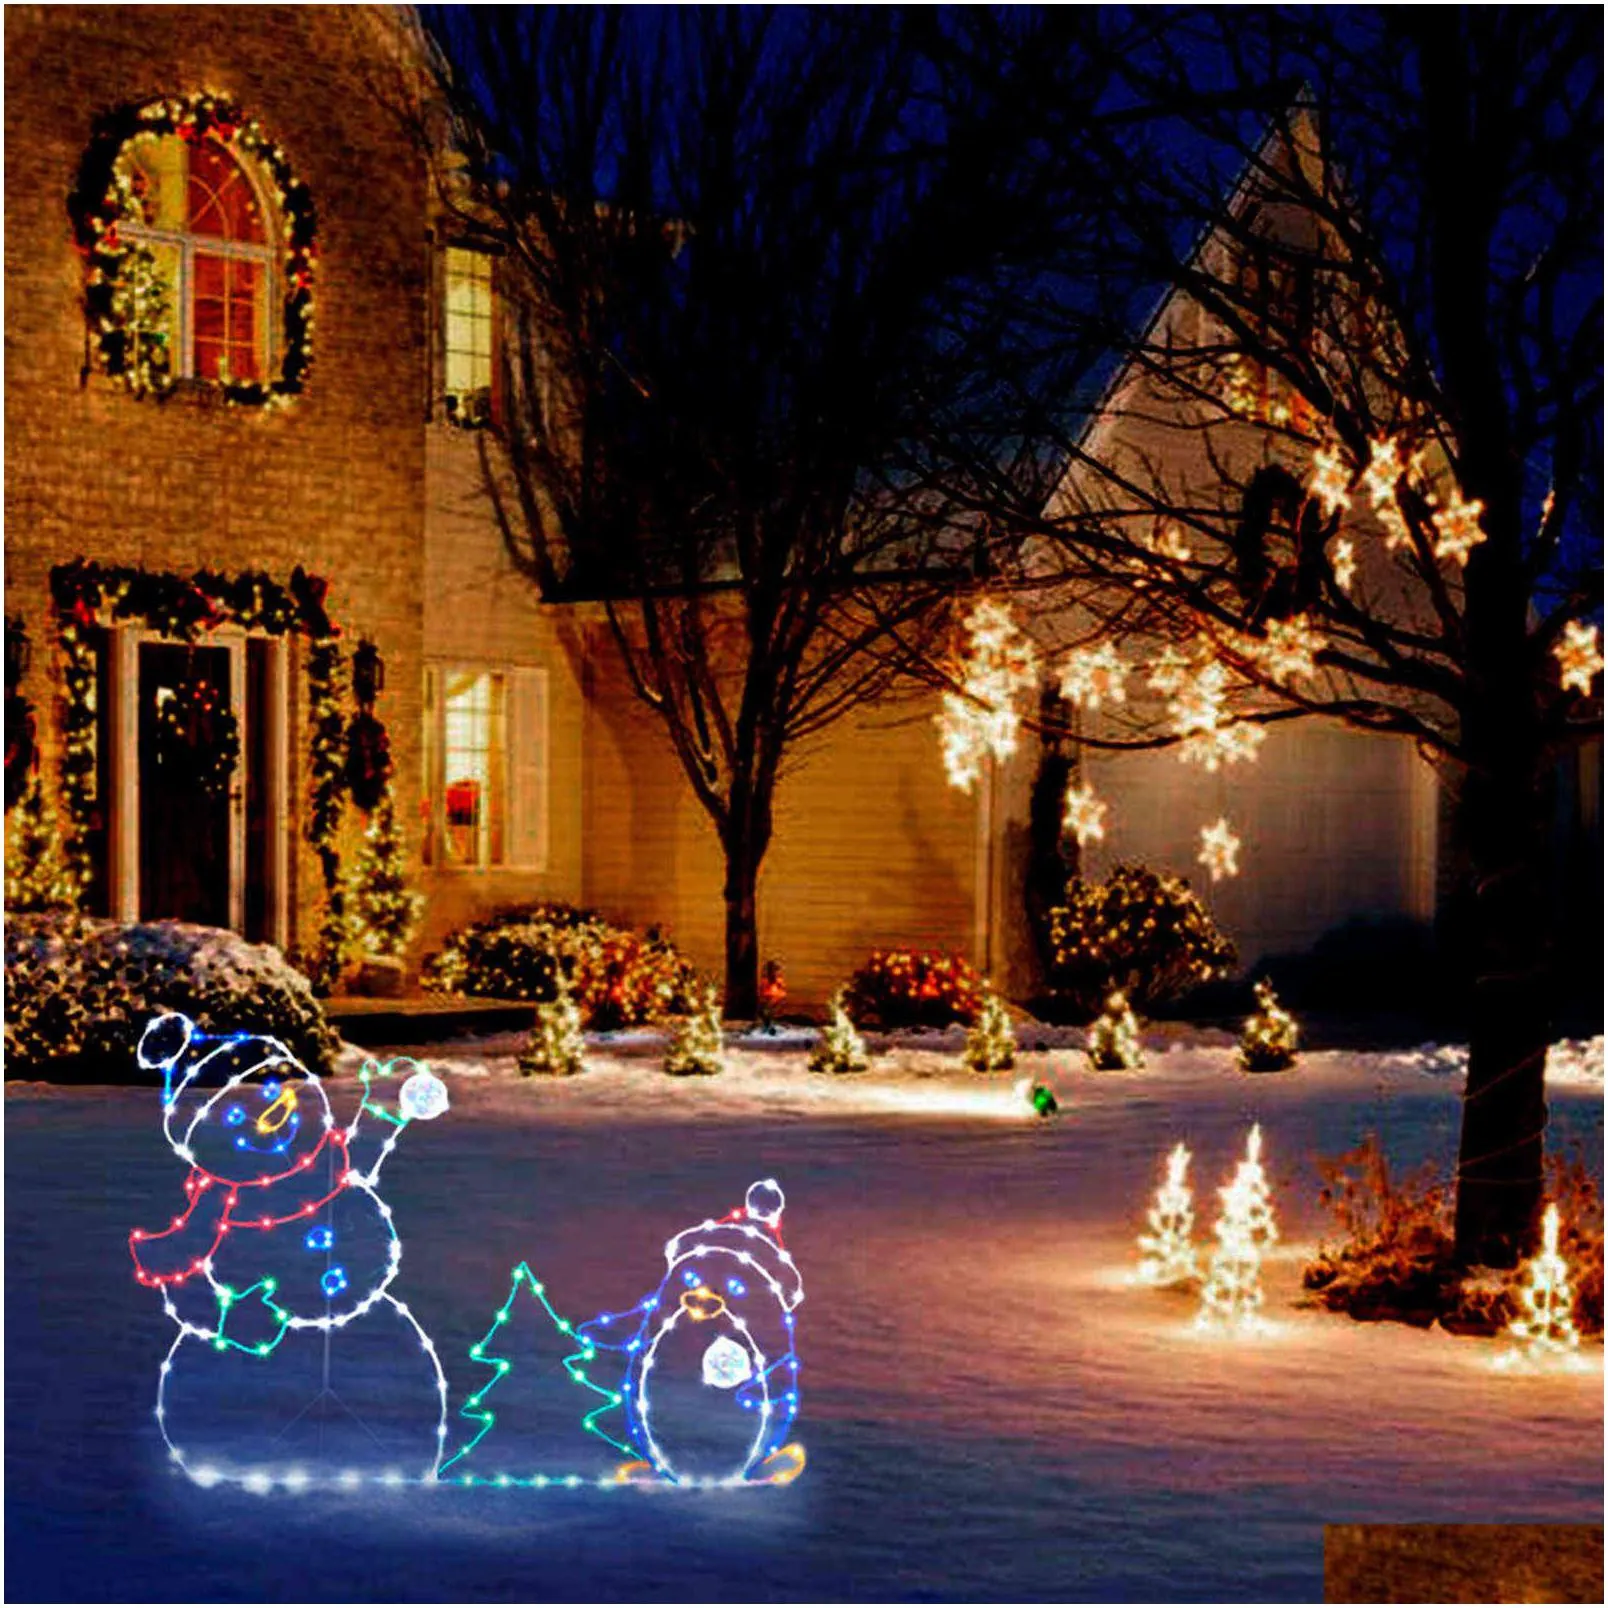 fun animated snowball fight active light string frame decor holiday party christmas outdoor garden snow glowing decorative sign h1020